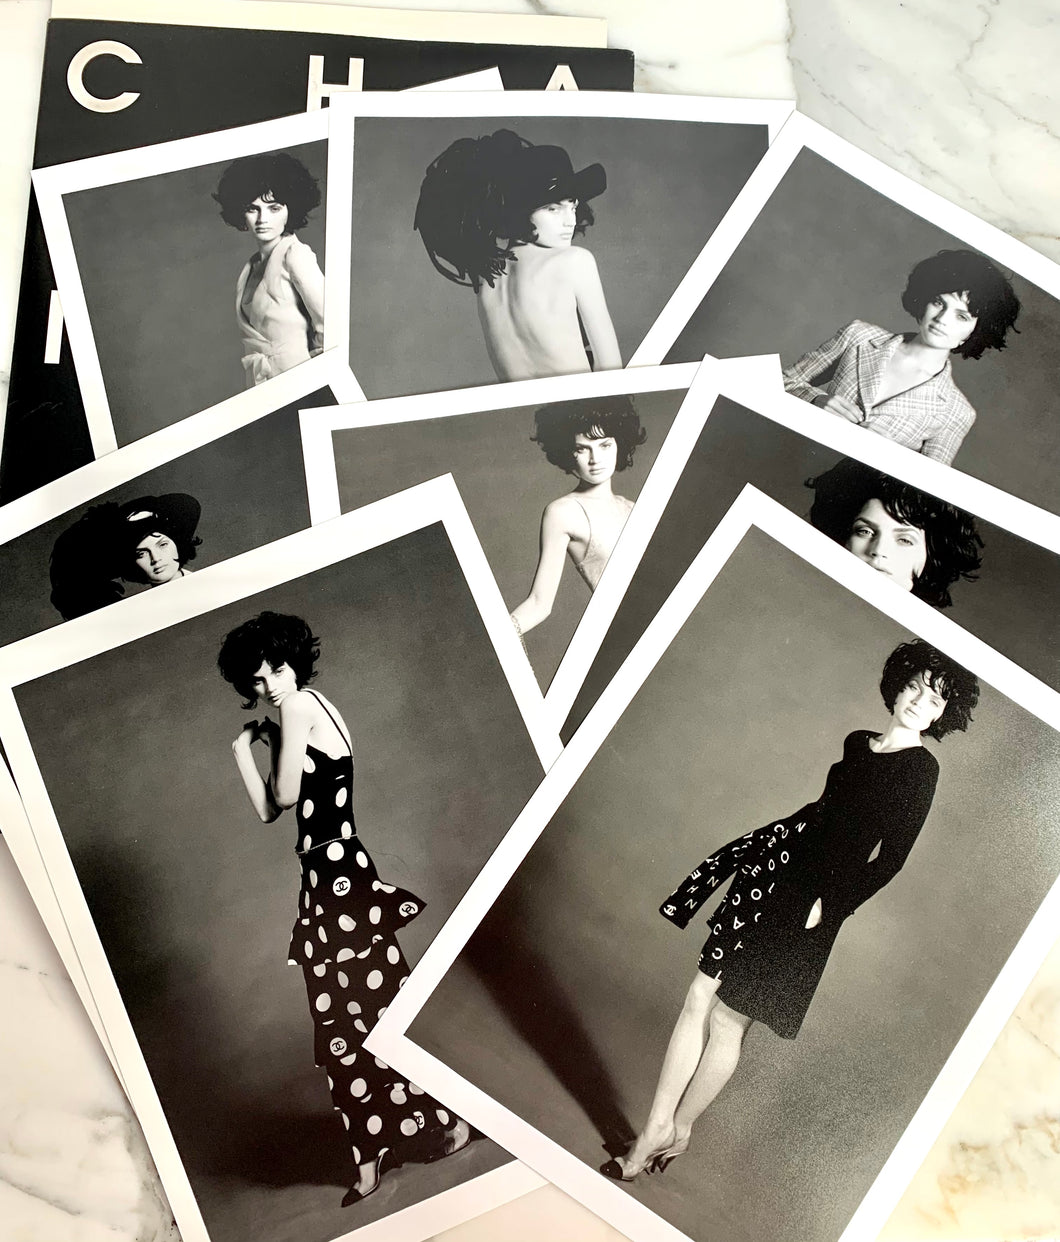 CHANEL 1997 SPRING SUMMER VIP ART PORTFOLIO WITH PHOTOS AND SKETCH